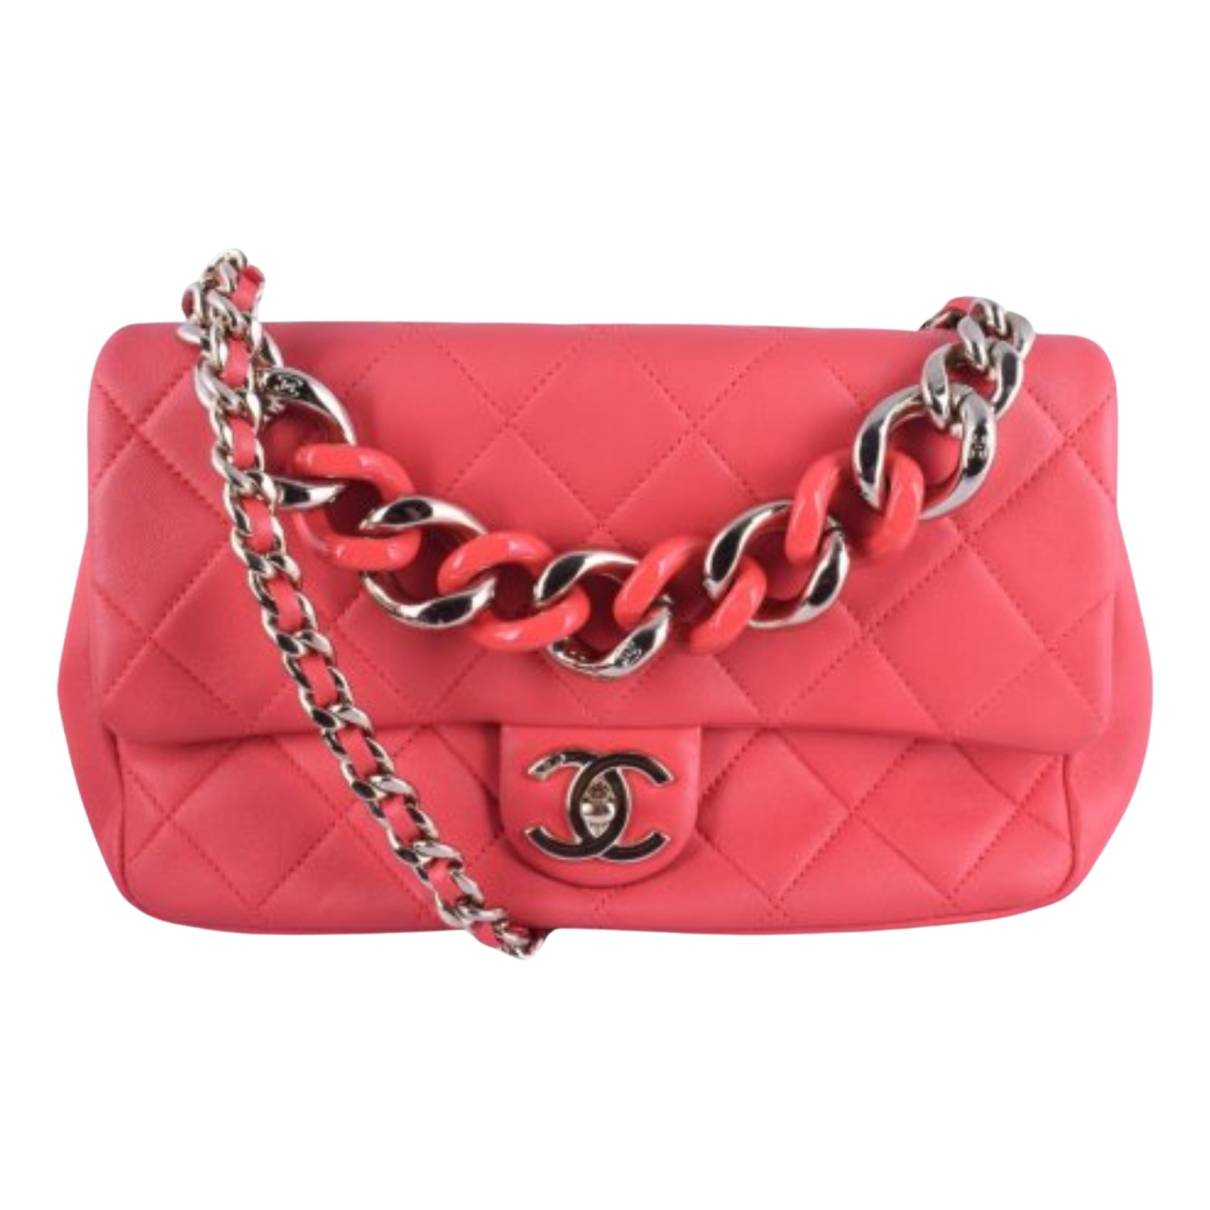 Chanel Flap Bag With Large Bi-Color Chain